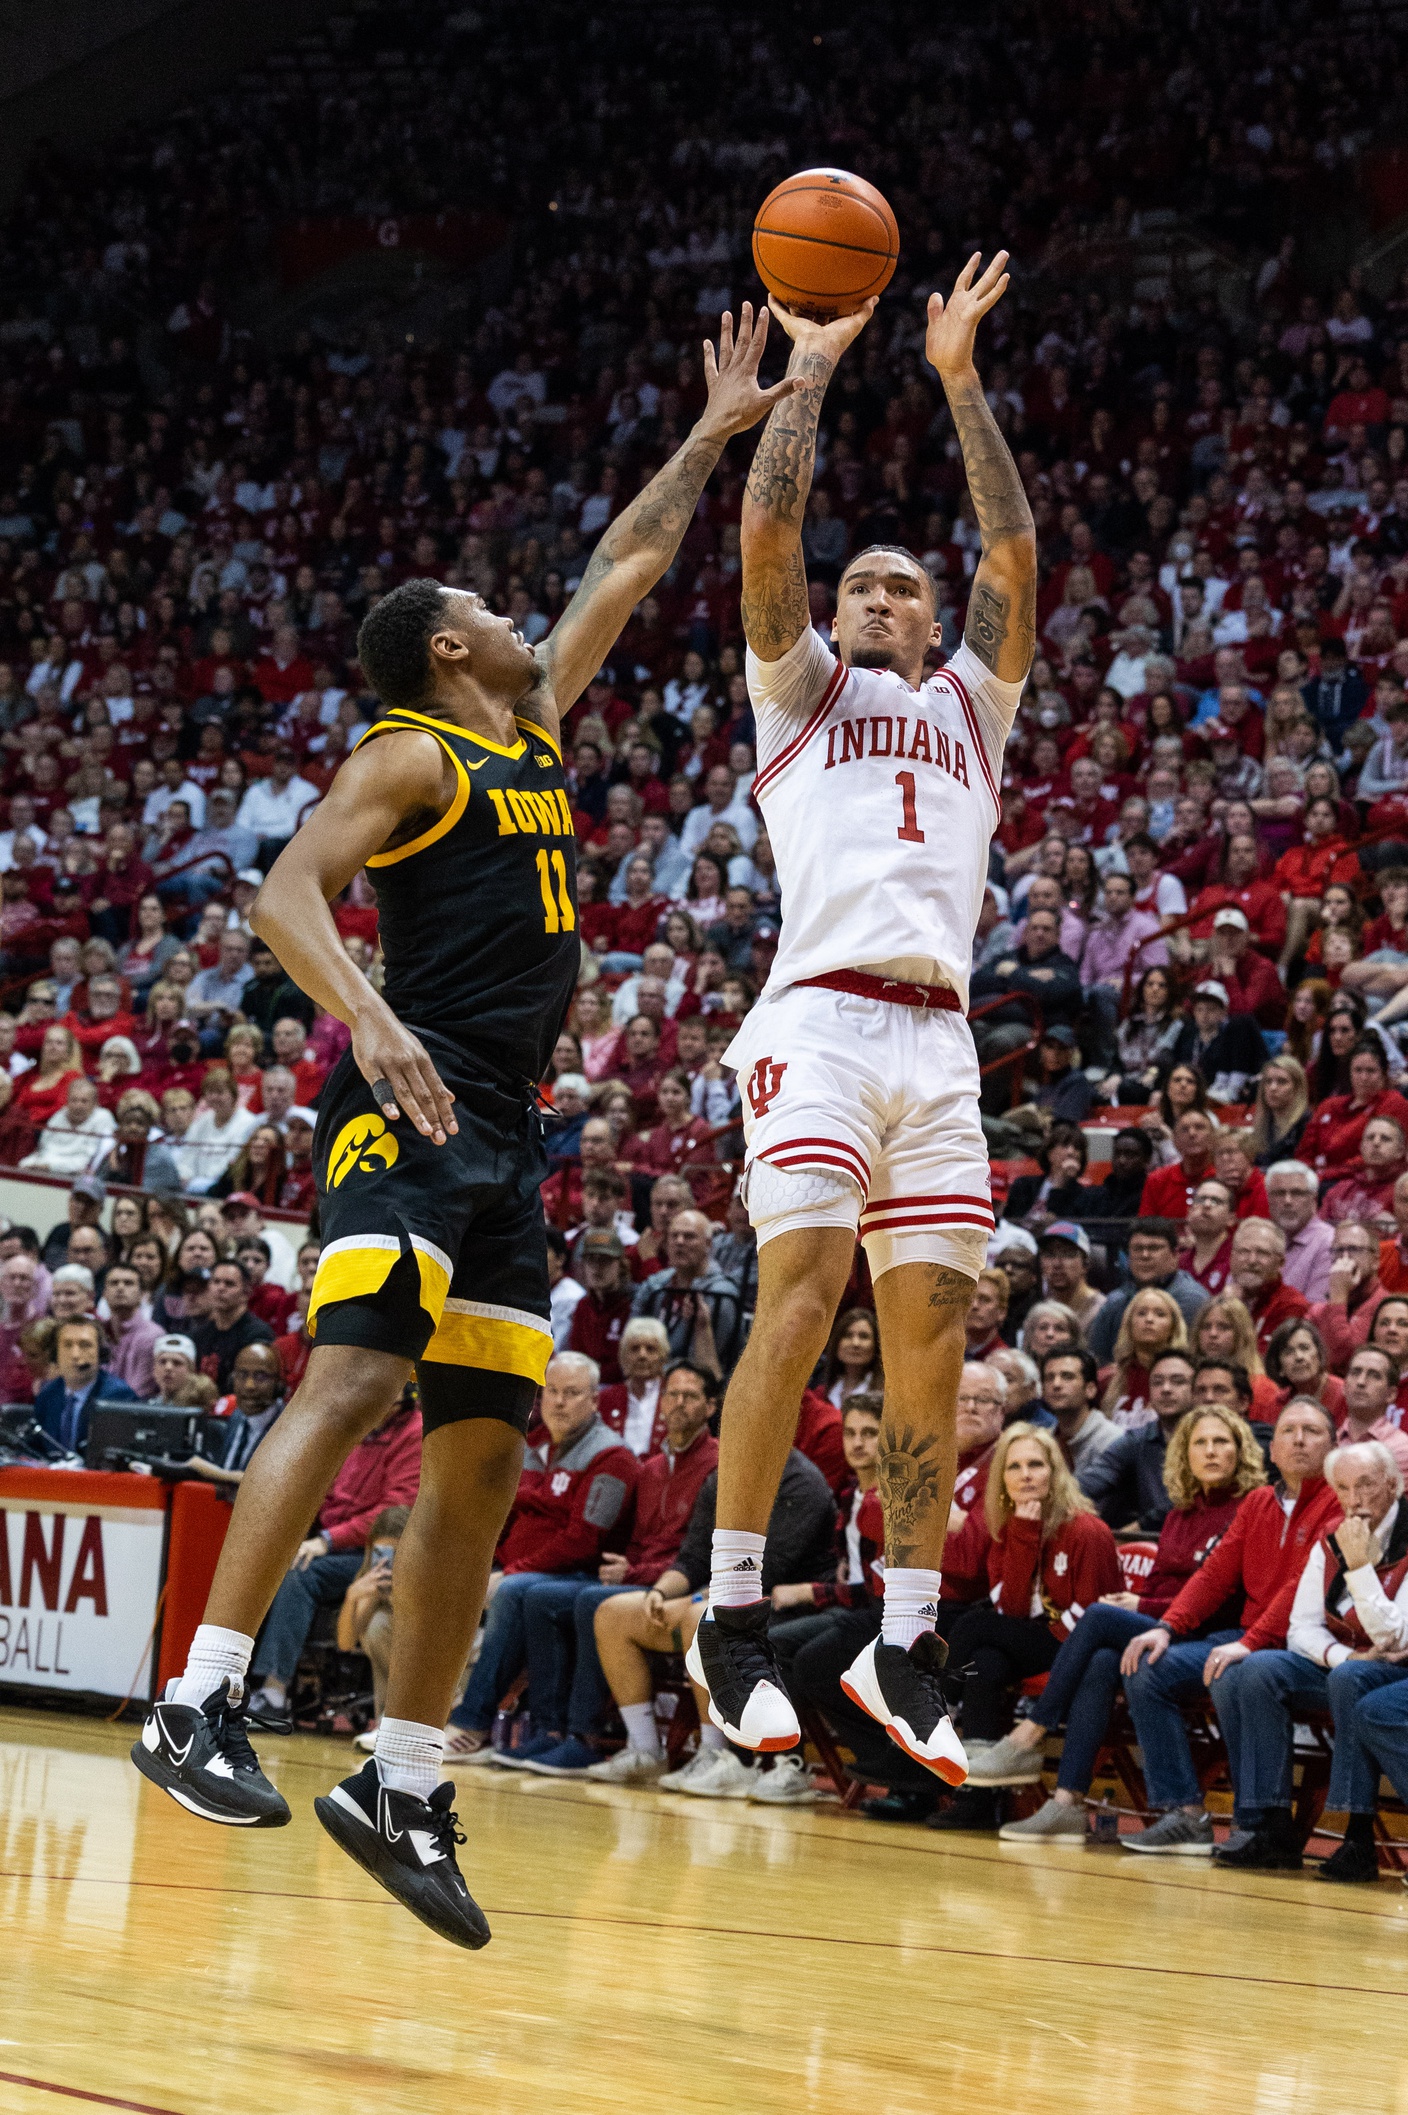 Indiana Hoosiers guard Jalen Hood-Schifino (1) shoots the ball while Iowa Hawkeyes guard Tony Perkins (11) defends in the first half at Simon Skjodt Assembly Hall.